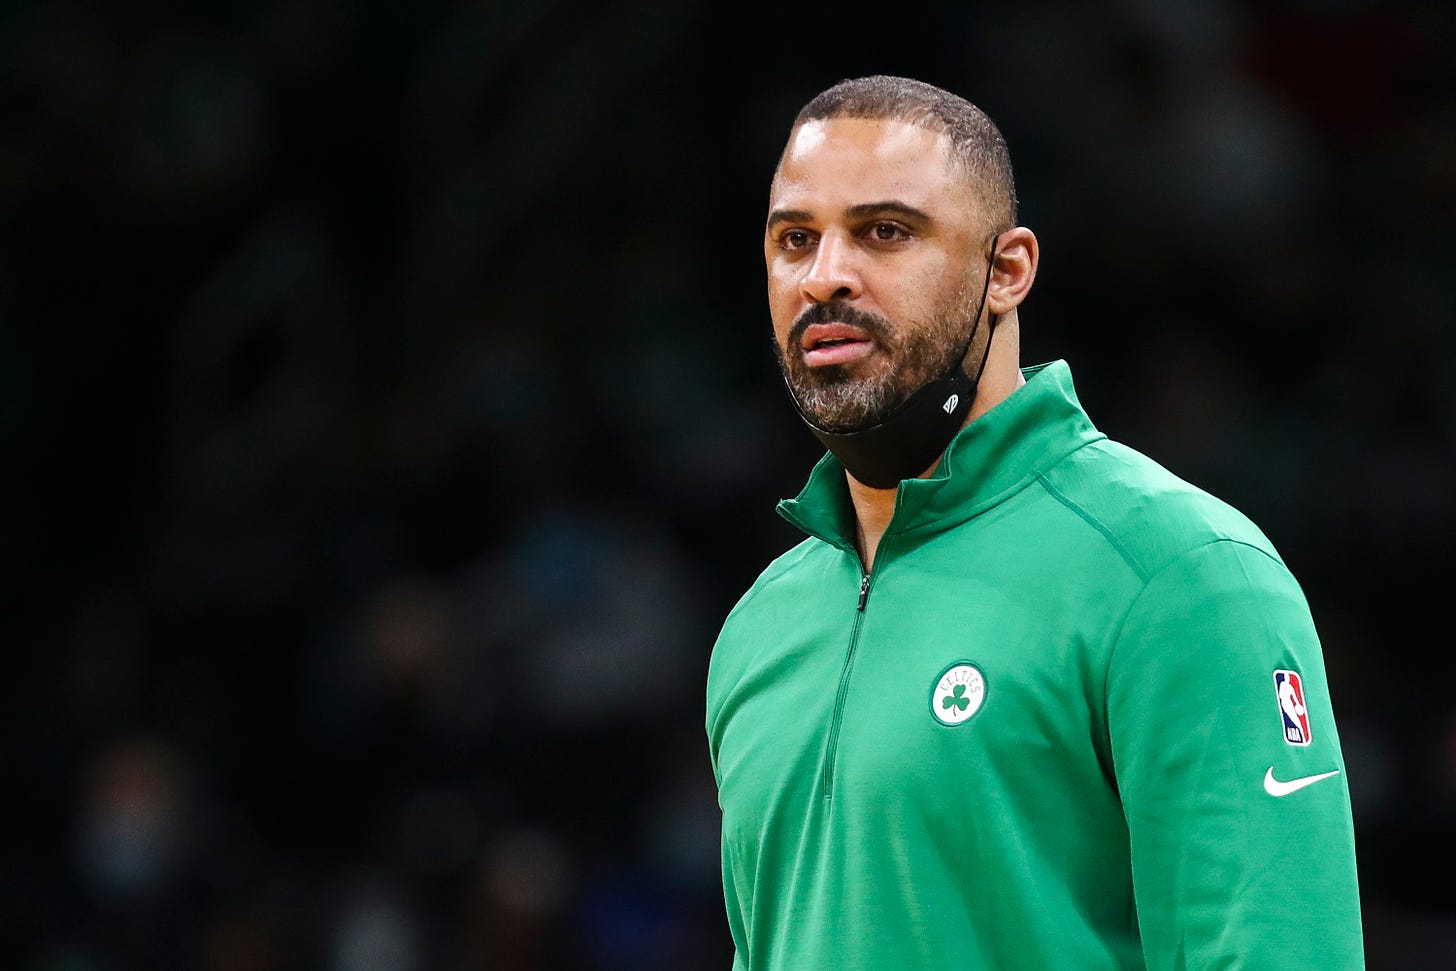 Celtics consider suspending head coach Ime Udoka over relationship with  staffer: reports 